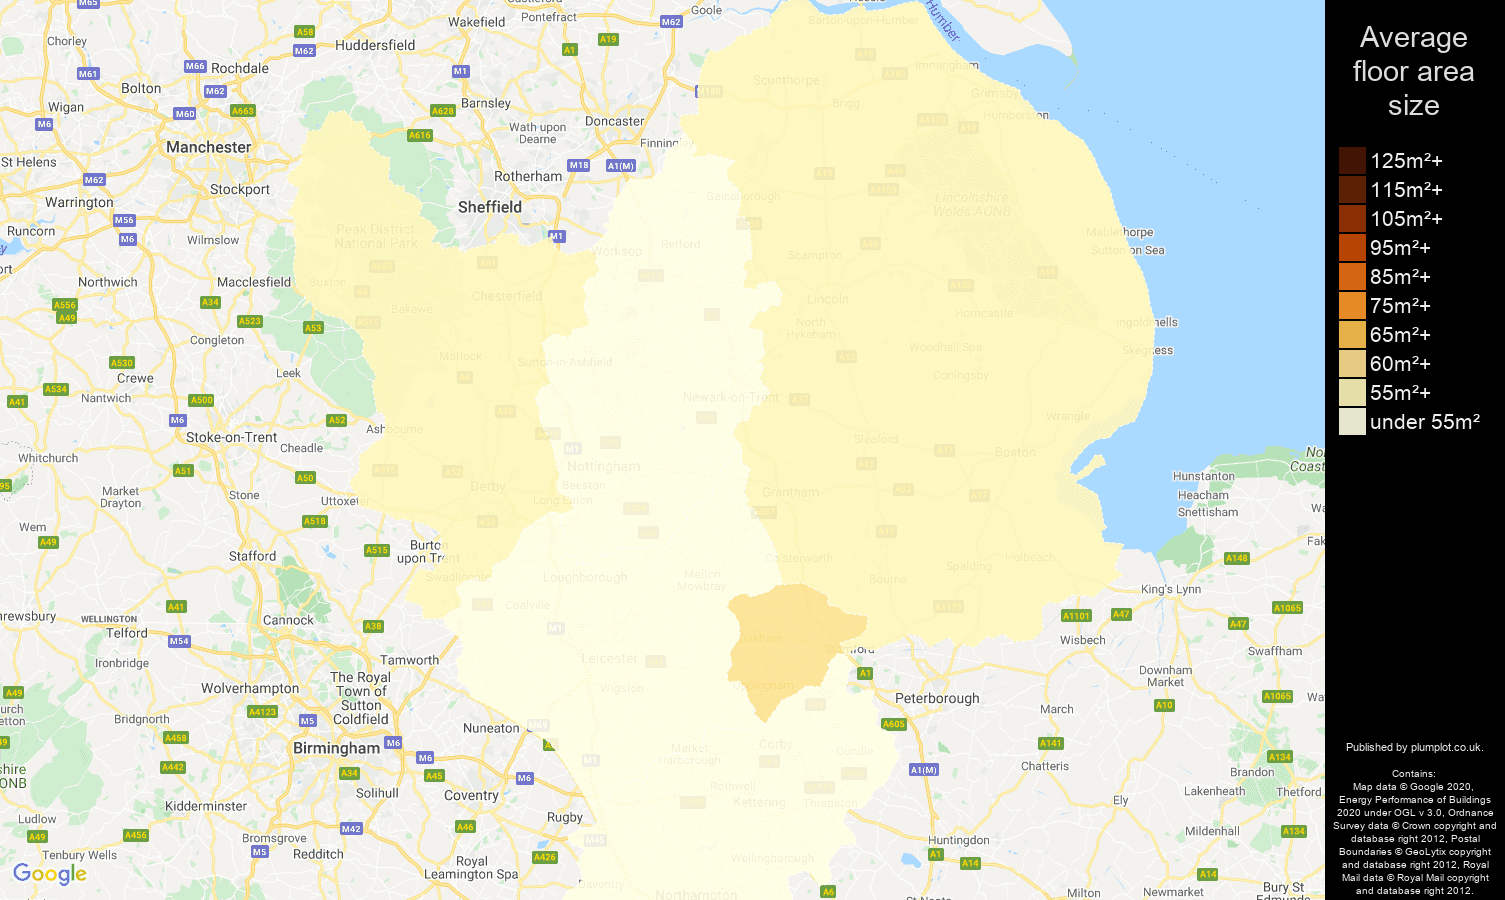 East Midlands map of average floor area size of flats